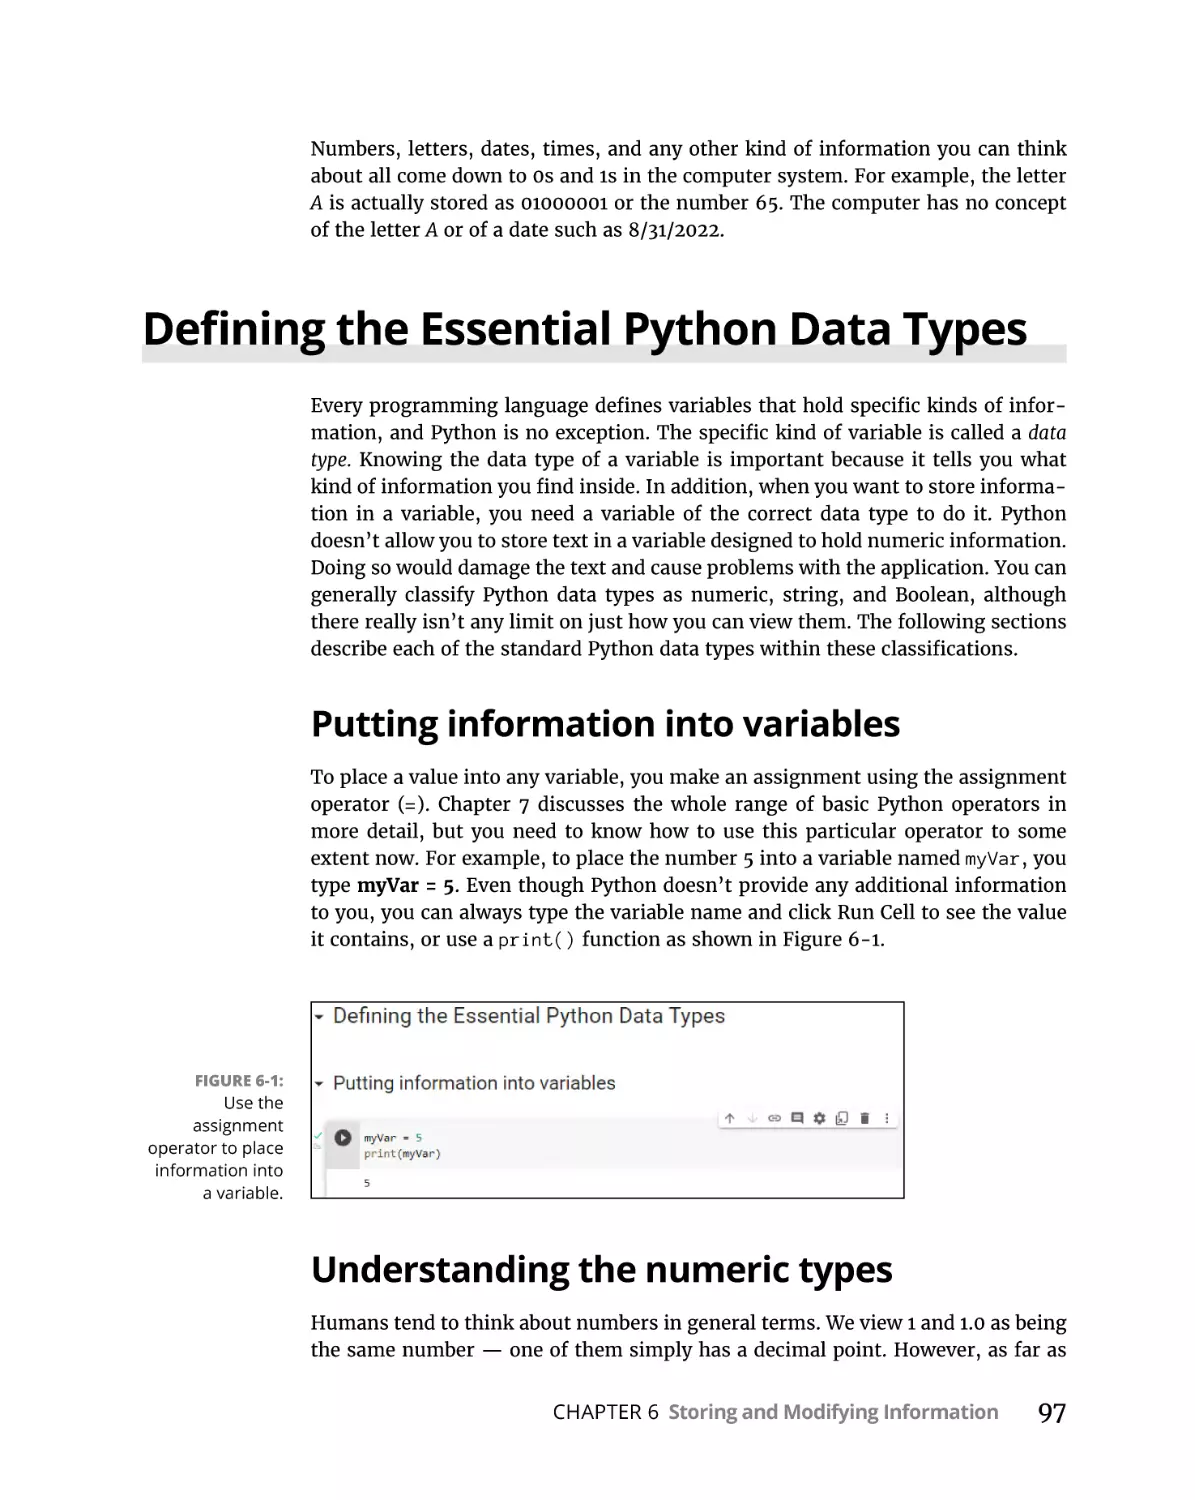 Defining the Essential Python Data Types
Putting information into variables
Understanding the numeric types